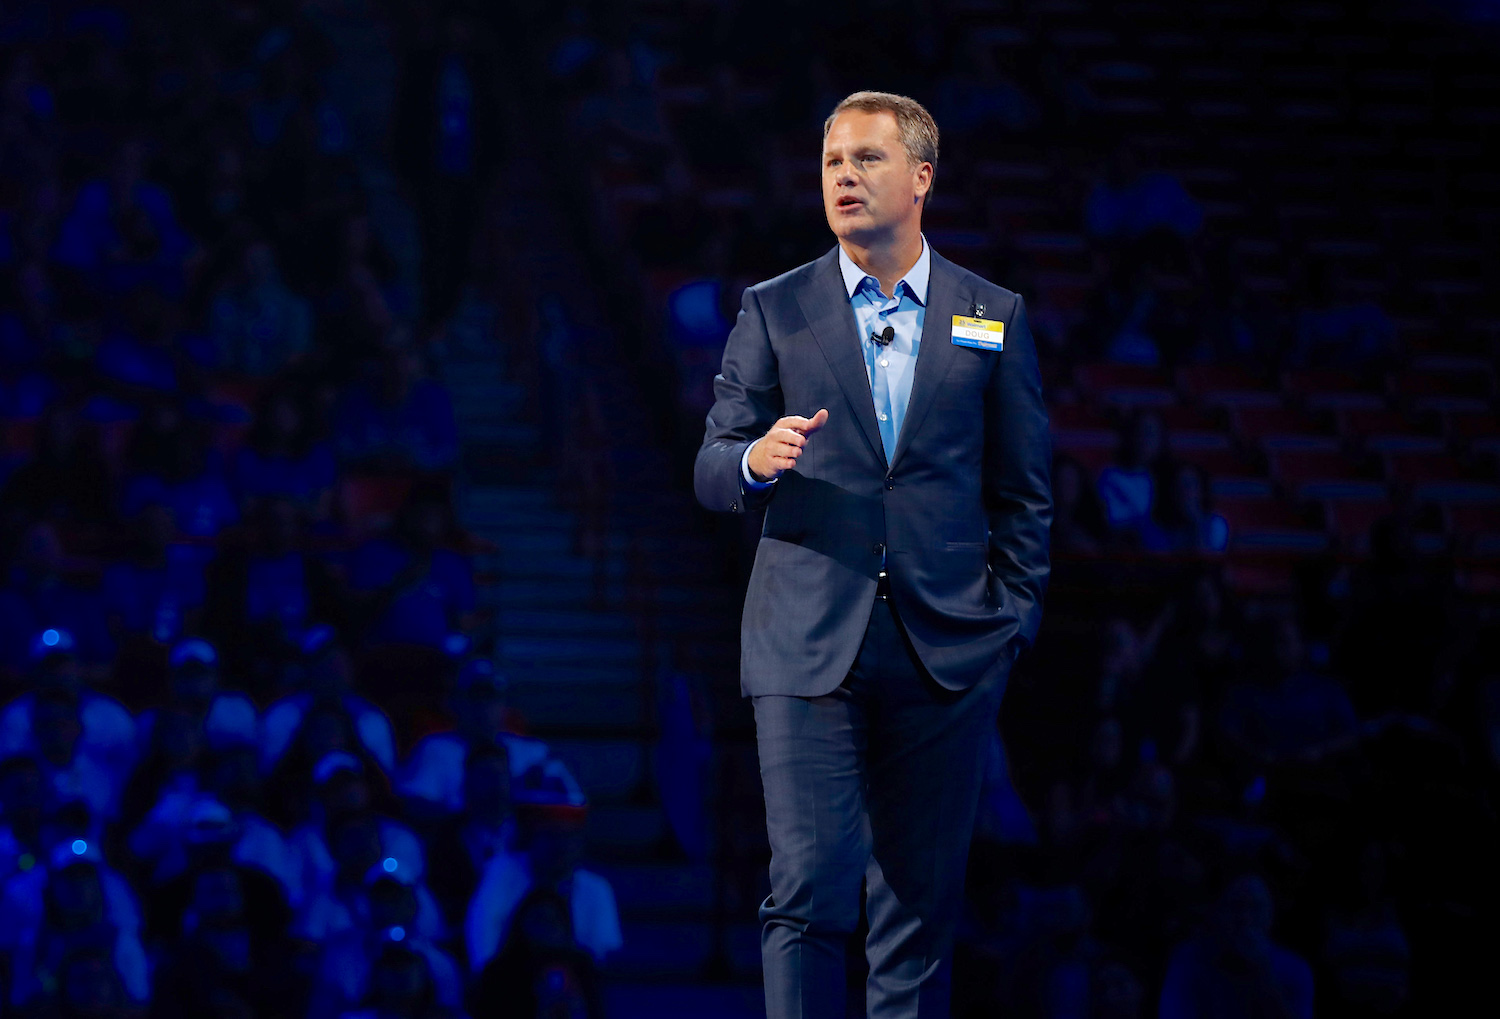 Walmart CEO Made 976 Times the Median Salary Last Year